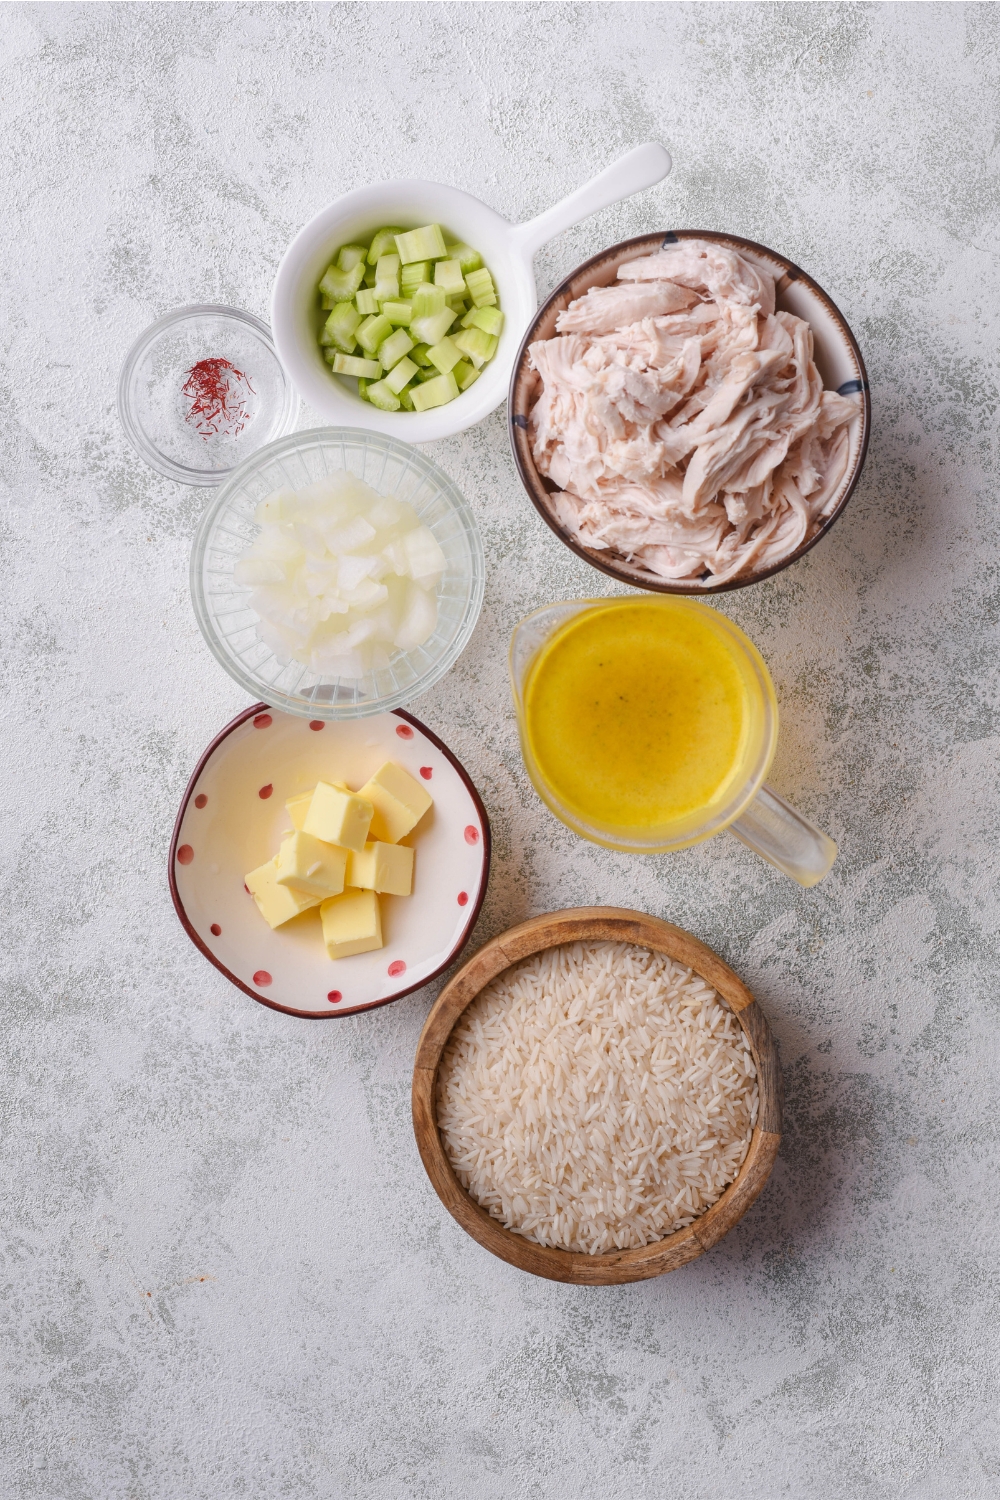 An assortment of ingredients including bowls of dried rice, broth, shredded chicken, butter cubes, diced onion, diced celery, and spices on a grey counter.